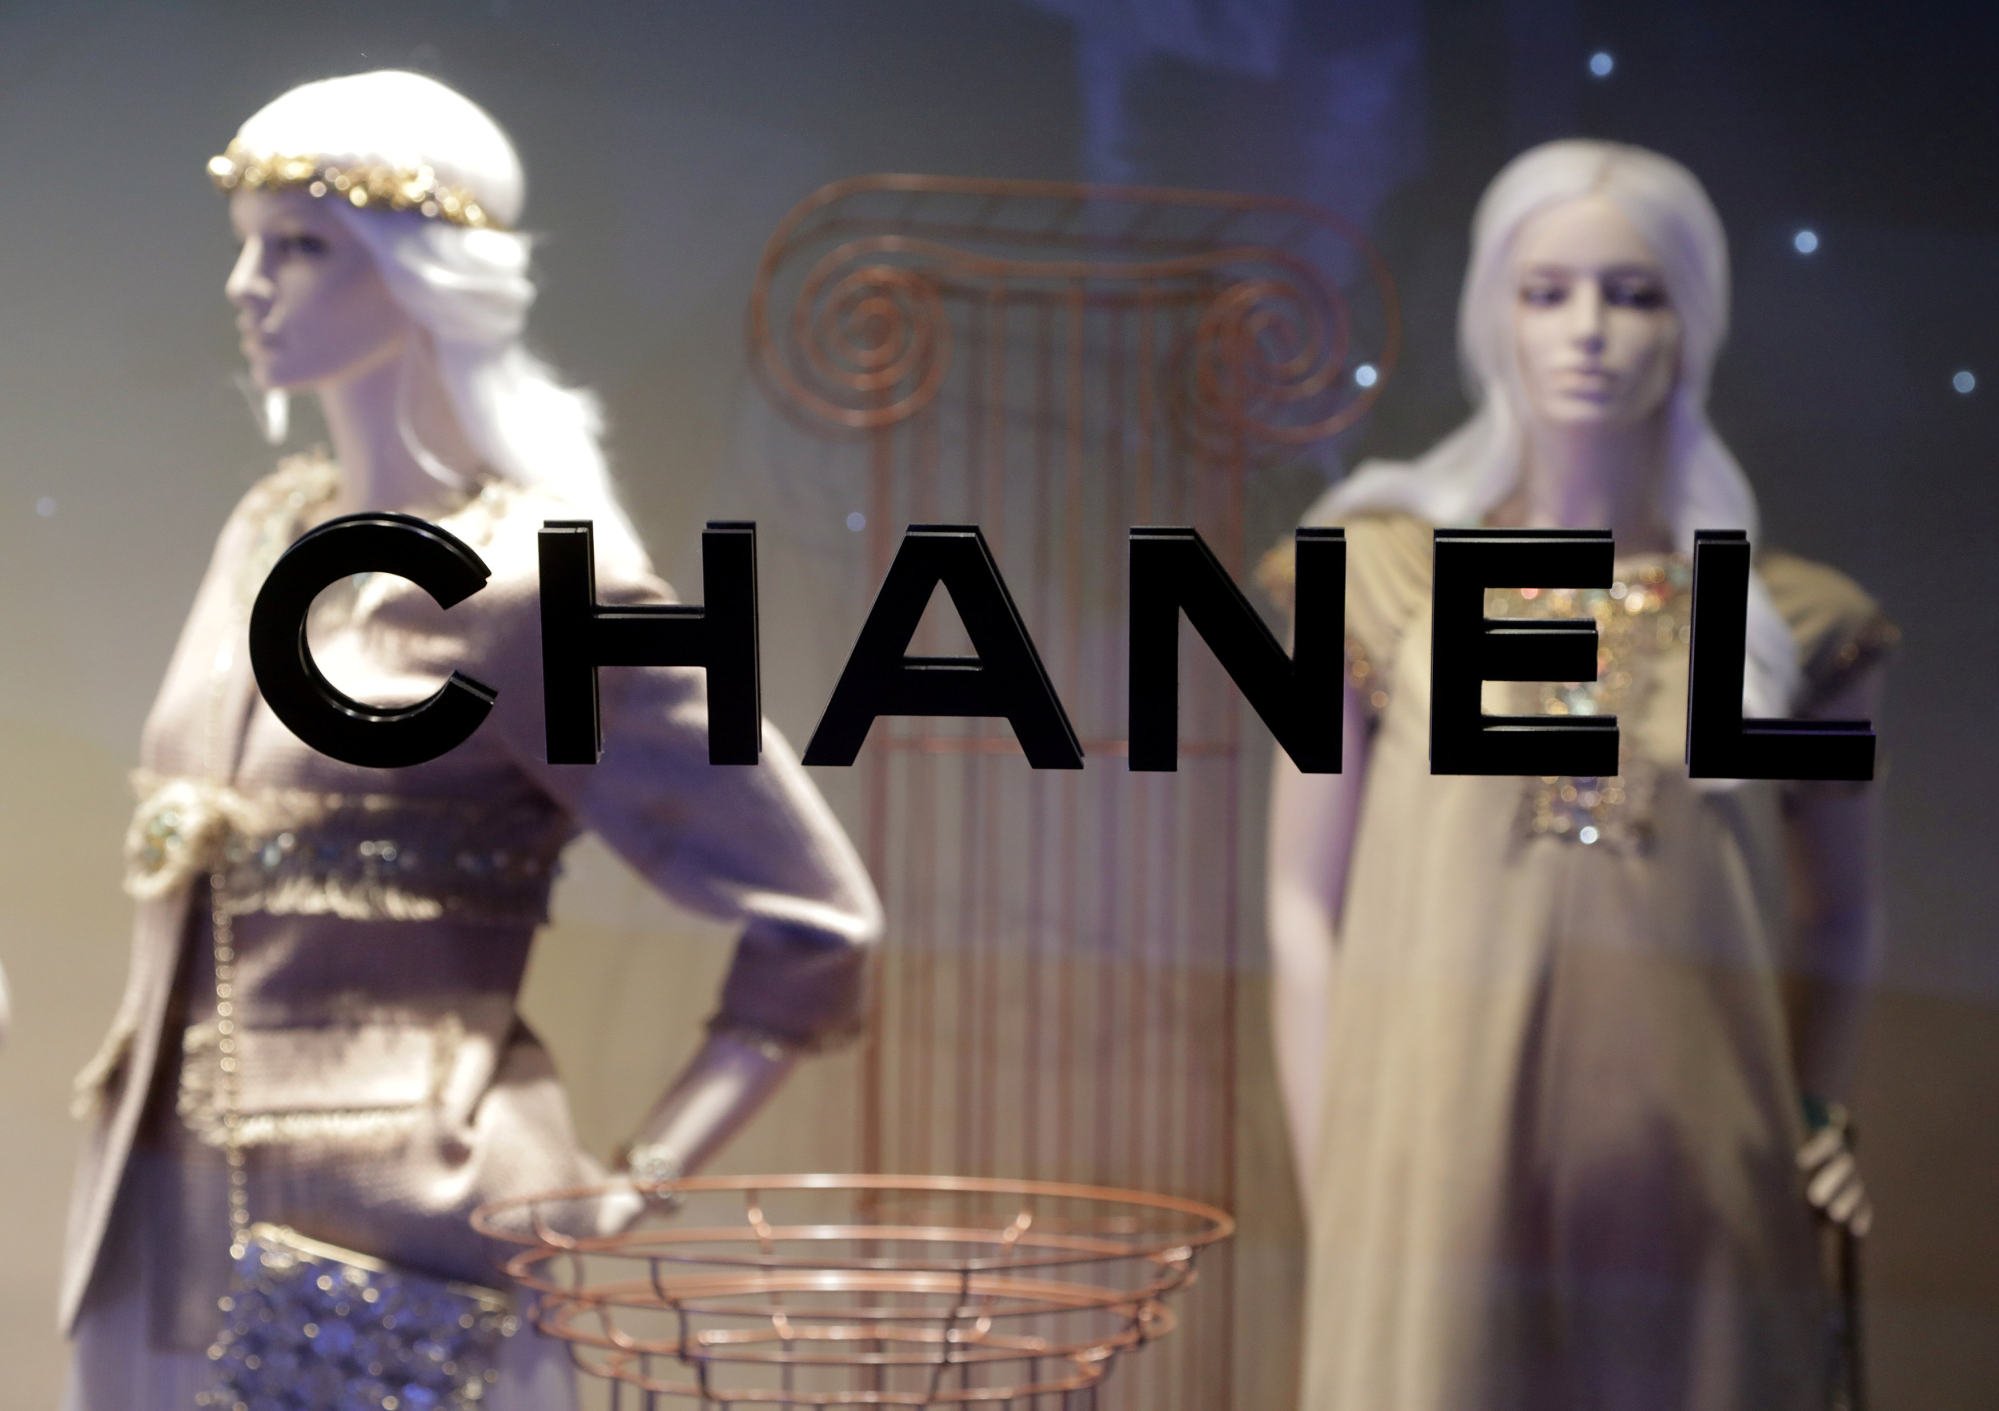 Presenting Chanel's High Jewellery Collection “Signature de Chanel”